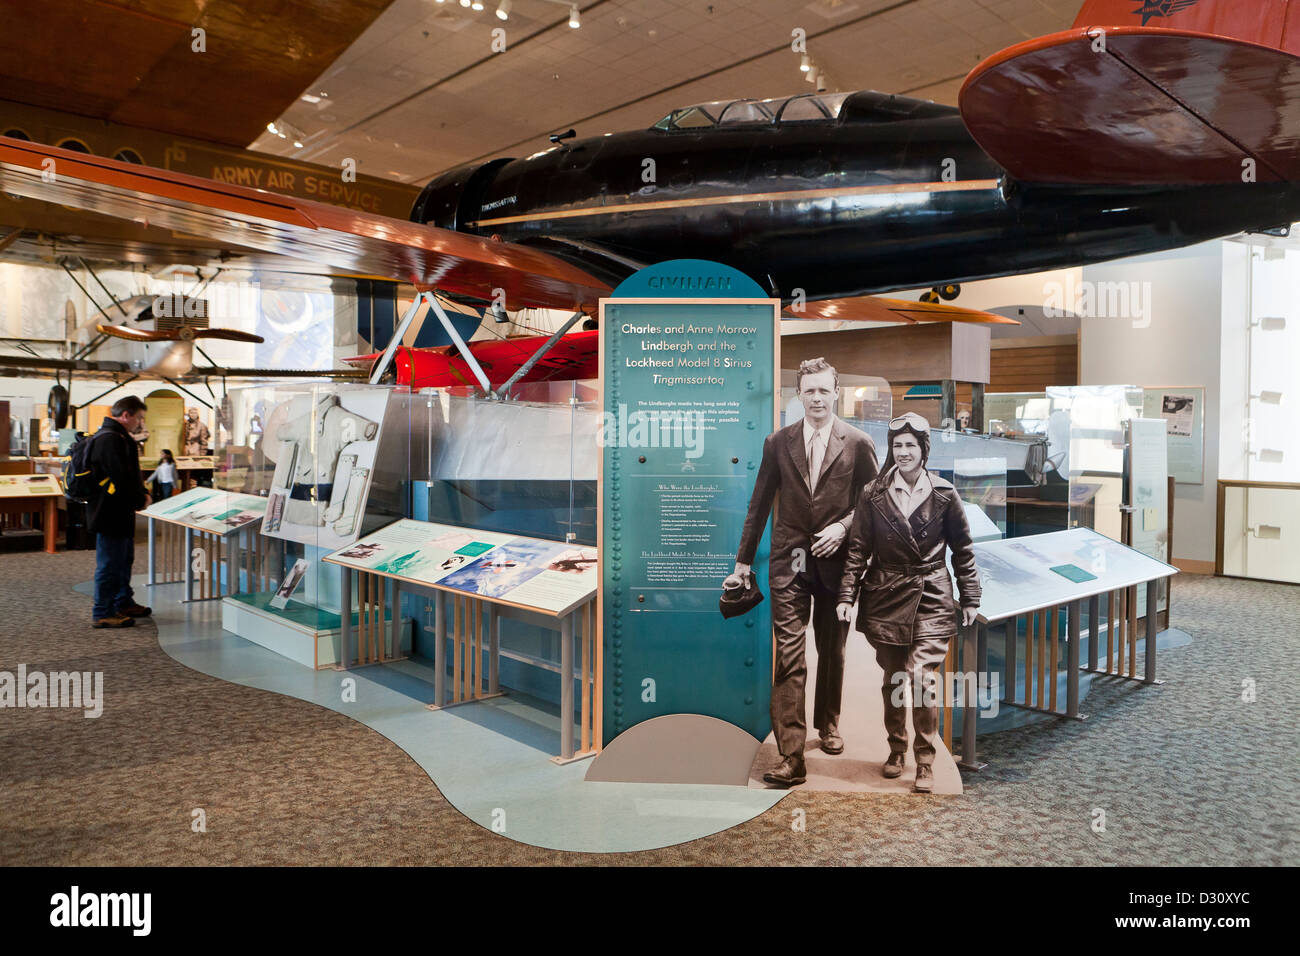 Charles and Anne Morrow Lindbergh and the Lockheed Model 8 Sirius Tingmissartoq display at the National Air and Space Museum Stock Photo